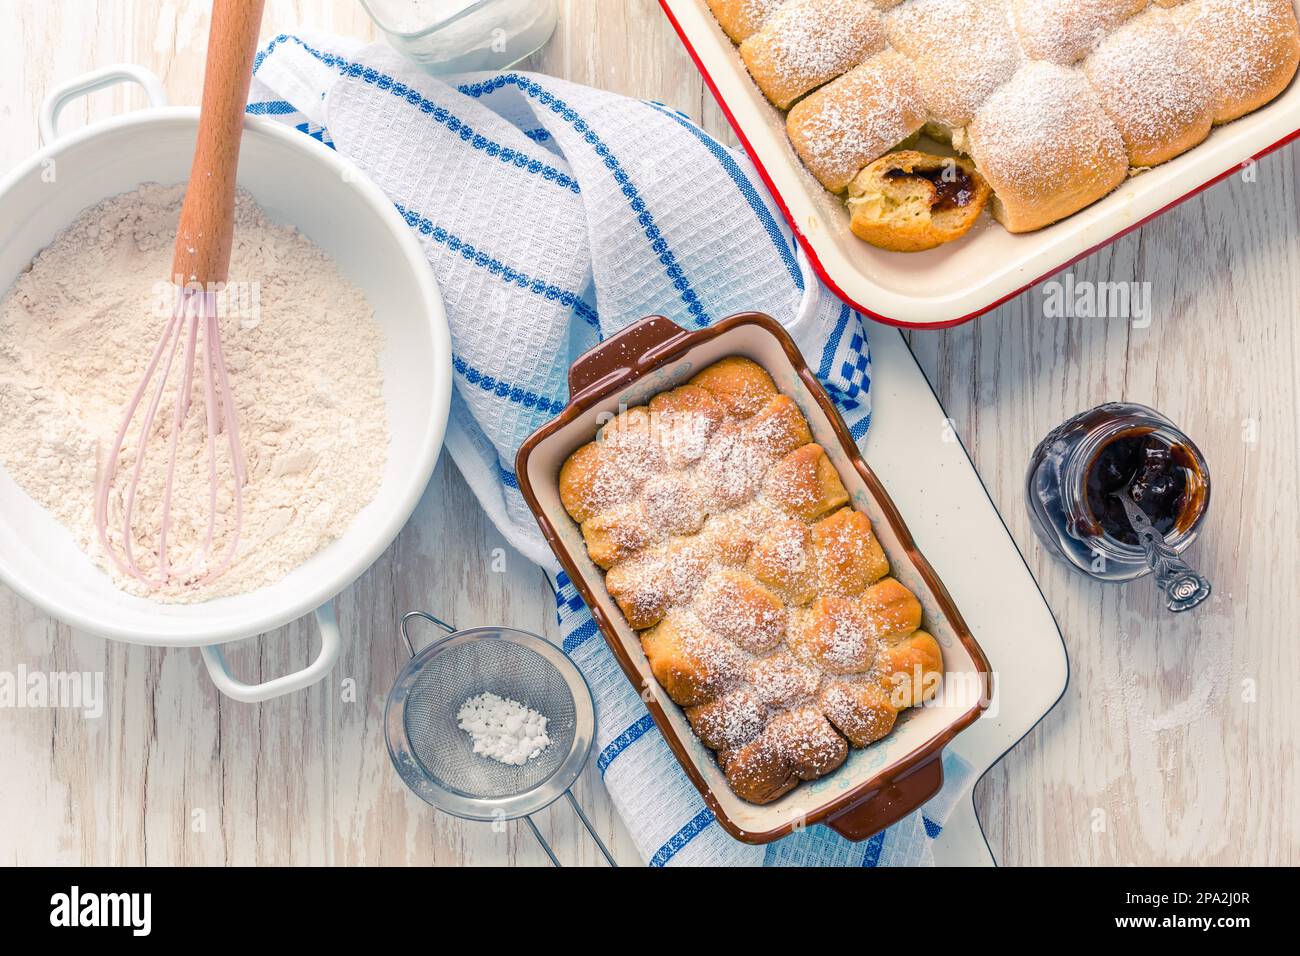 Sweet rolls, Buchteln filled with plum jam or jelly with backing ingredients Stock Photo